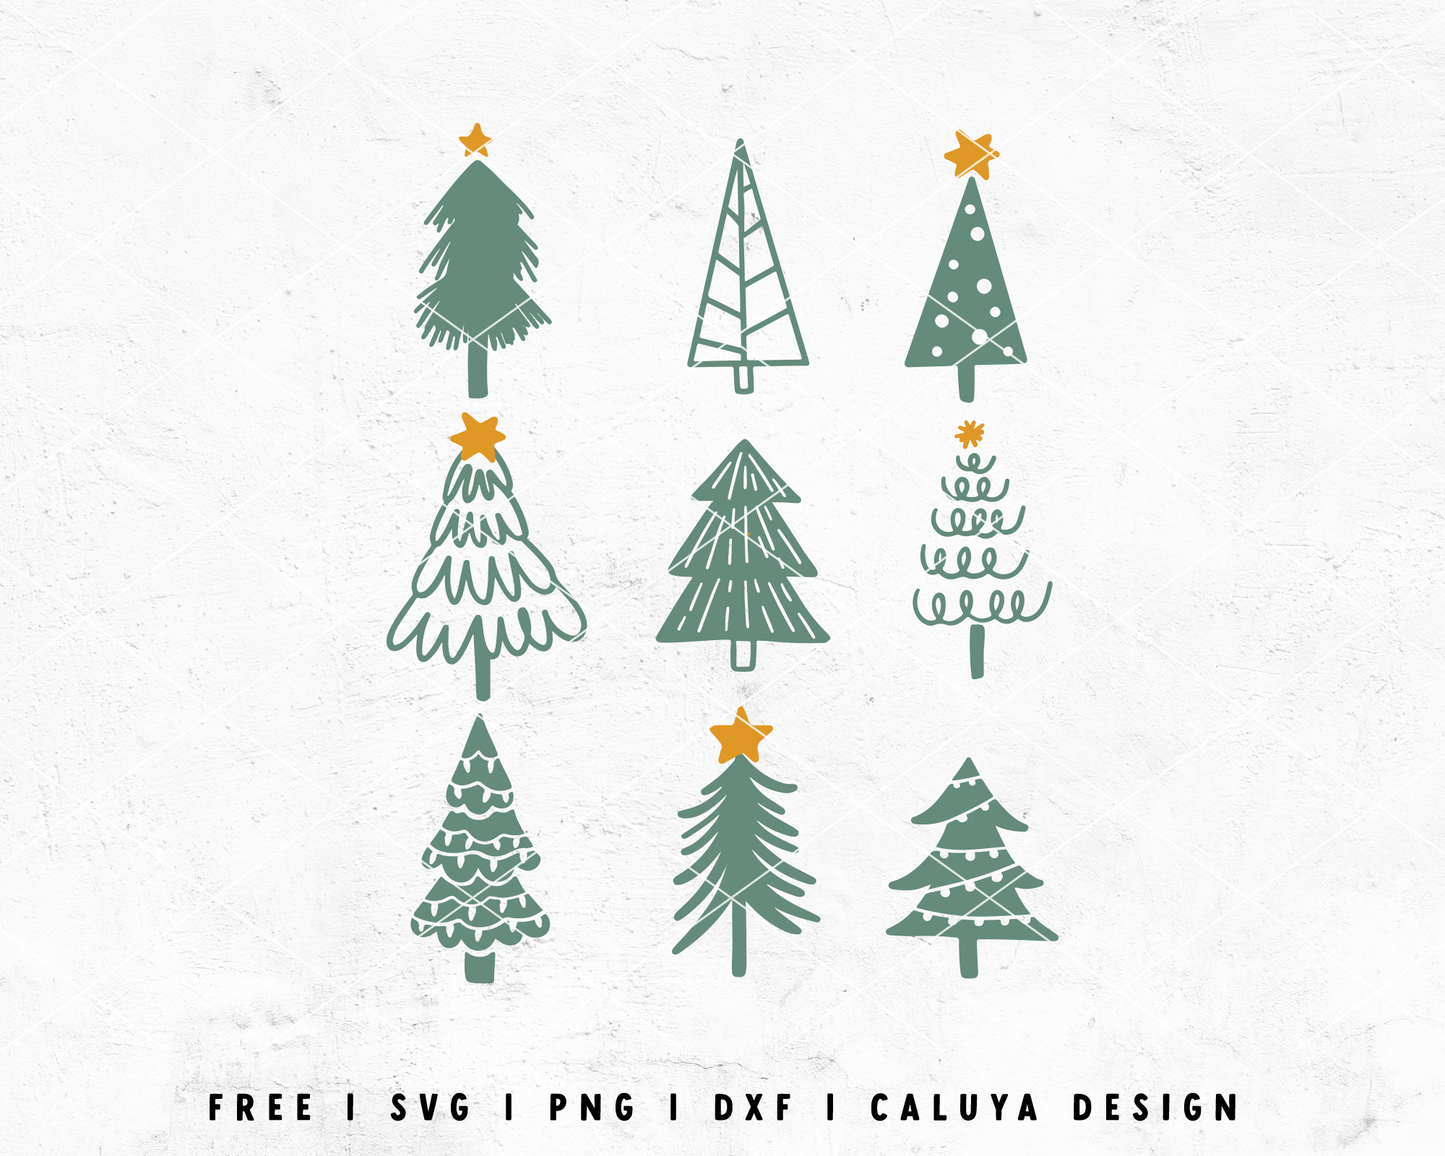 FREE Hand Drawn Christmas Tree SVG | Holiday SVG Cut File for Cricut, Cameo Silhouette | Free SVG Cut File